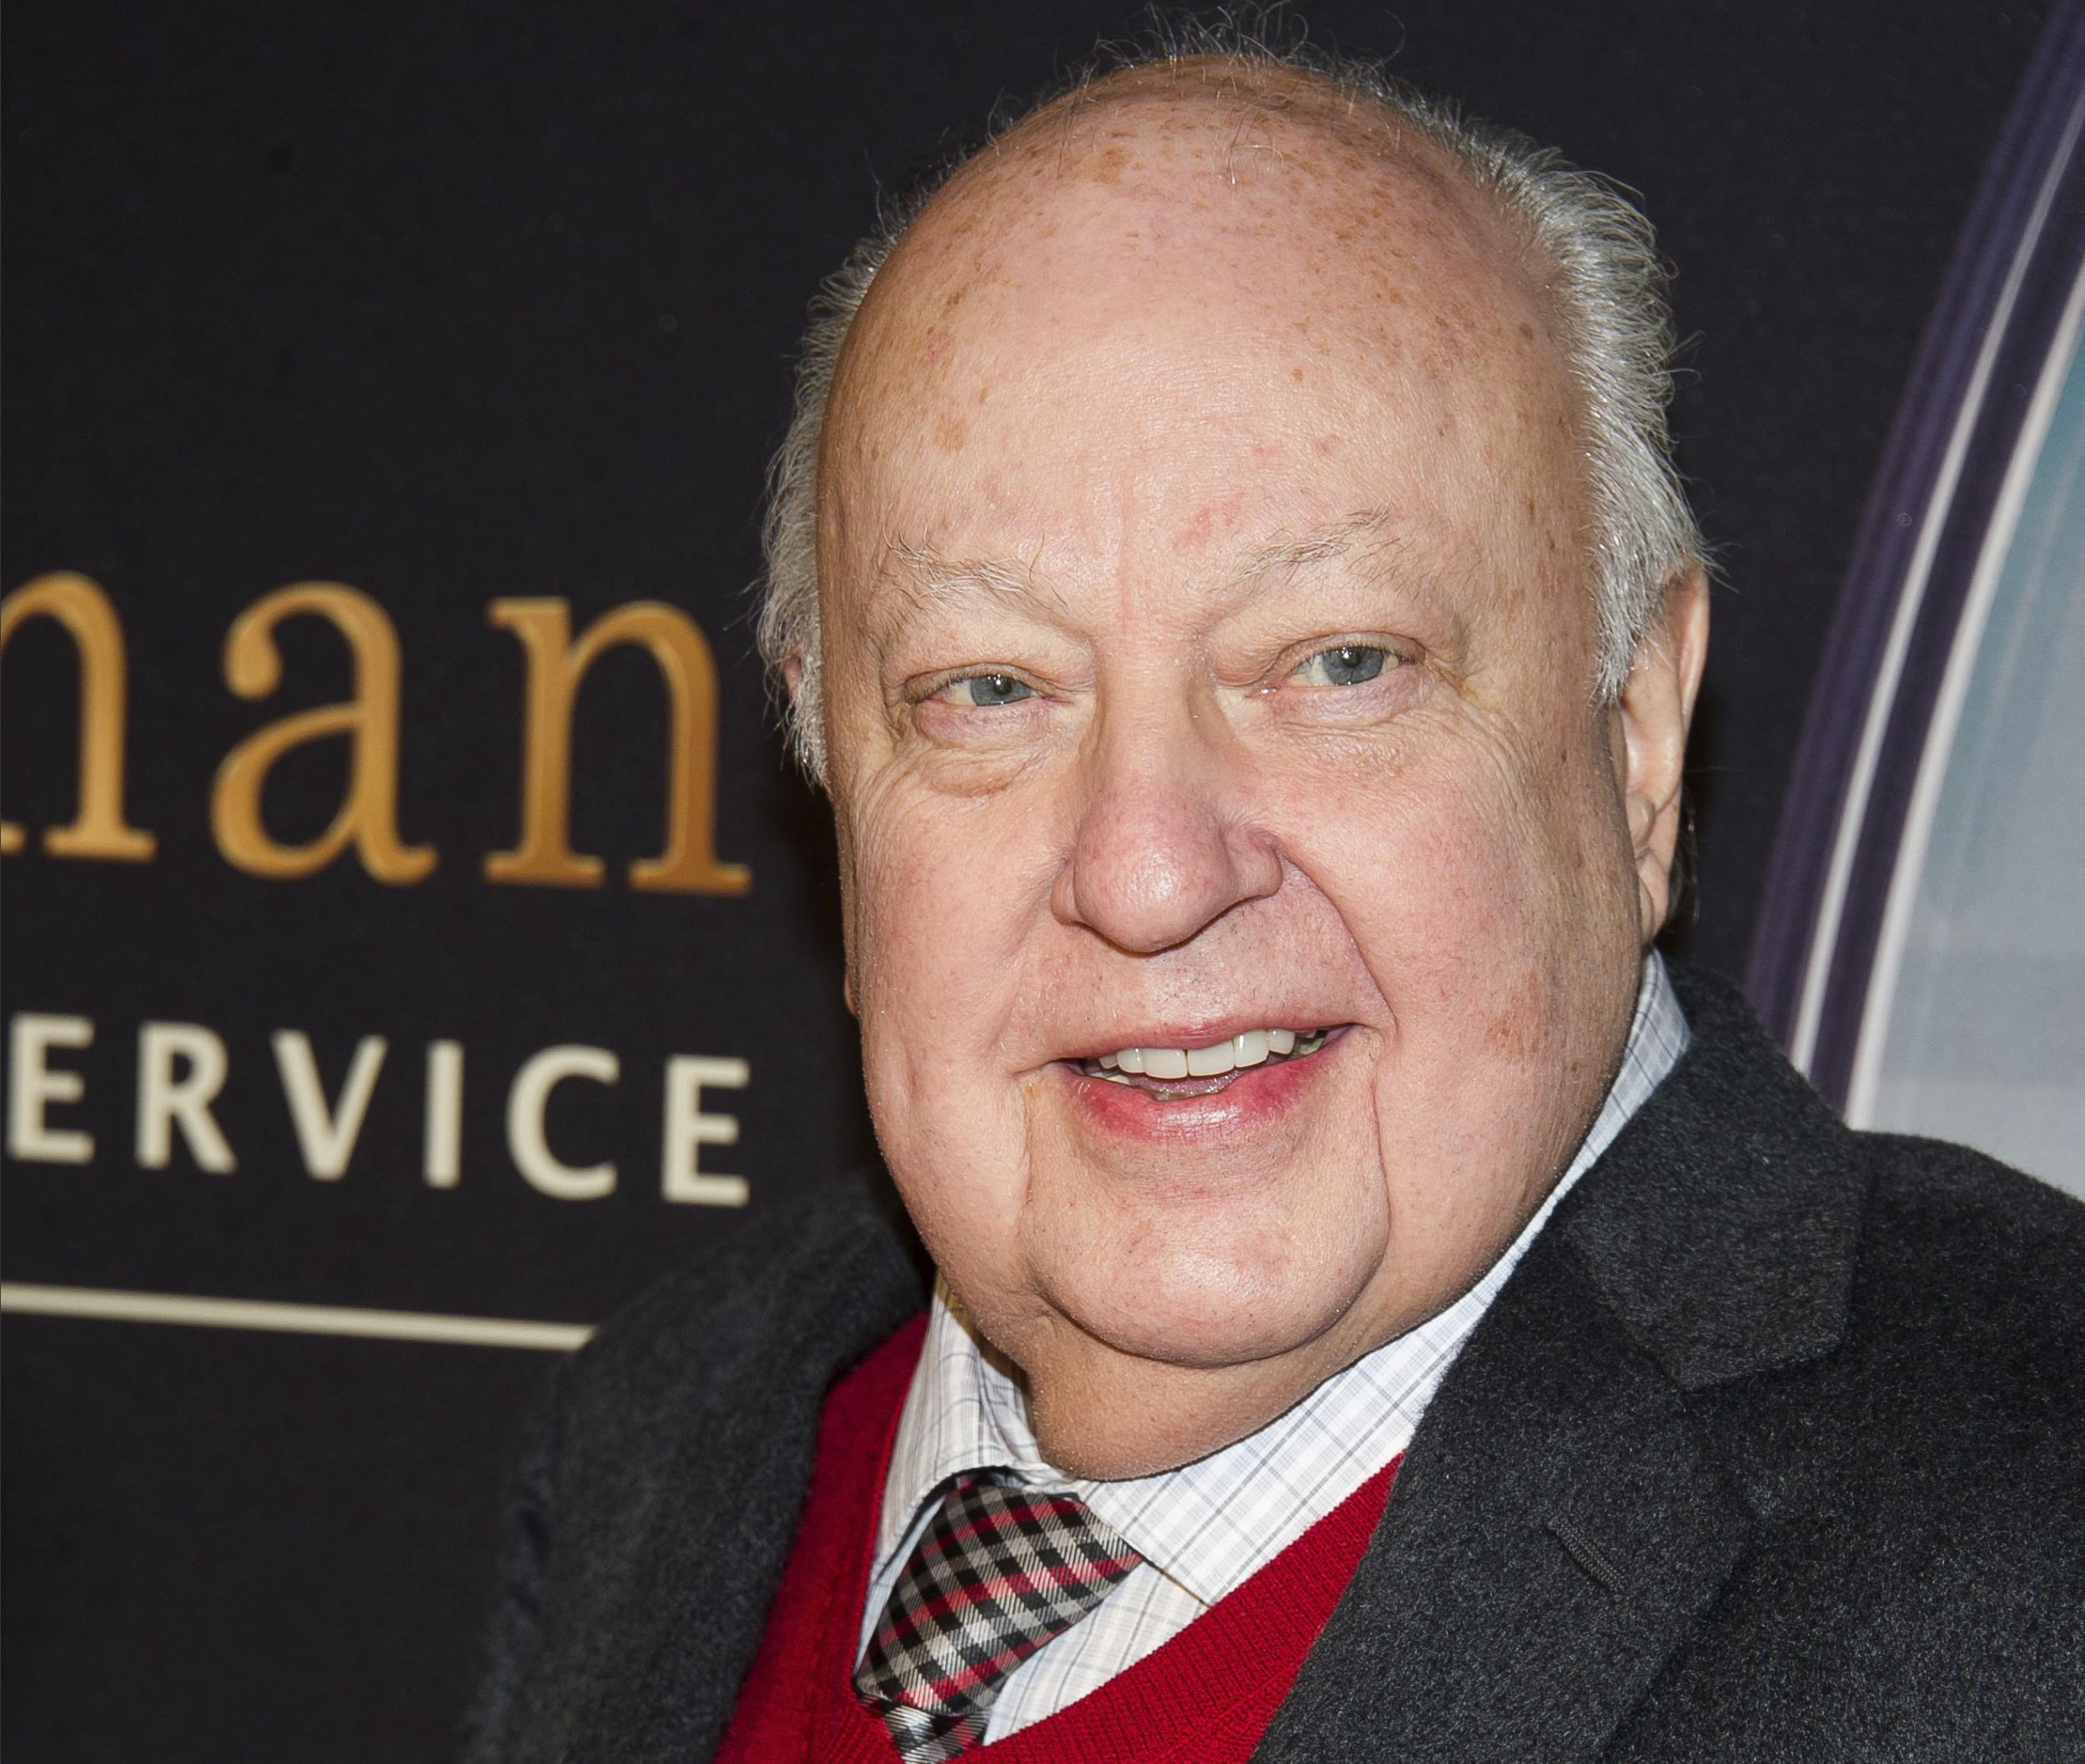 Former Fox News CEO Roger Ailes has died at age 77